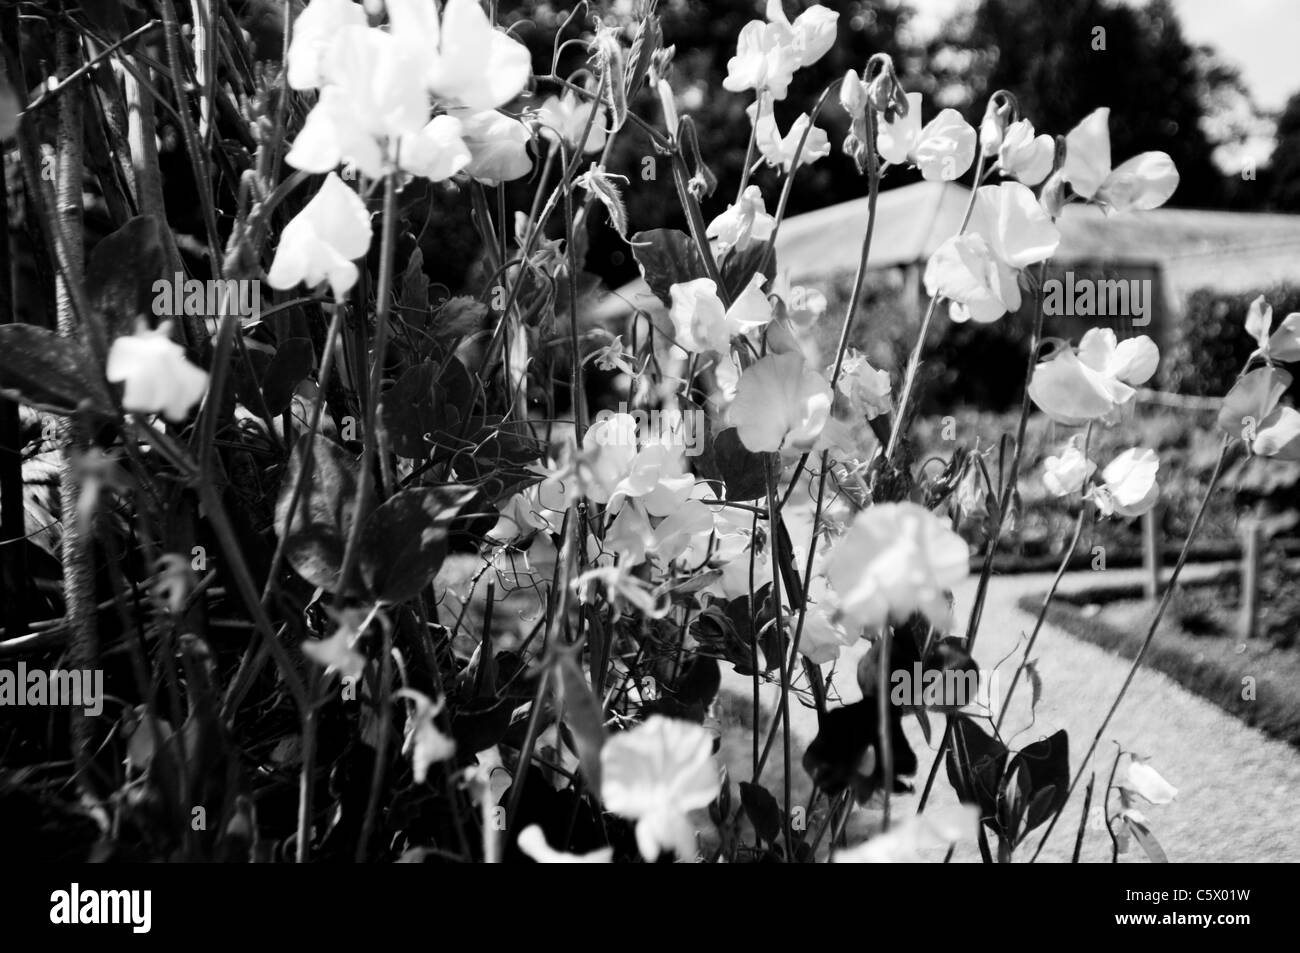 sweet pea, oxburgh hall, garden, gardens, national trust, flowers, sweet pea floral display, black and white, sweet pea cluster Stock Photo